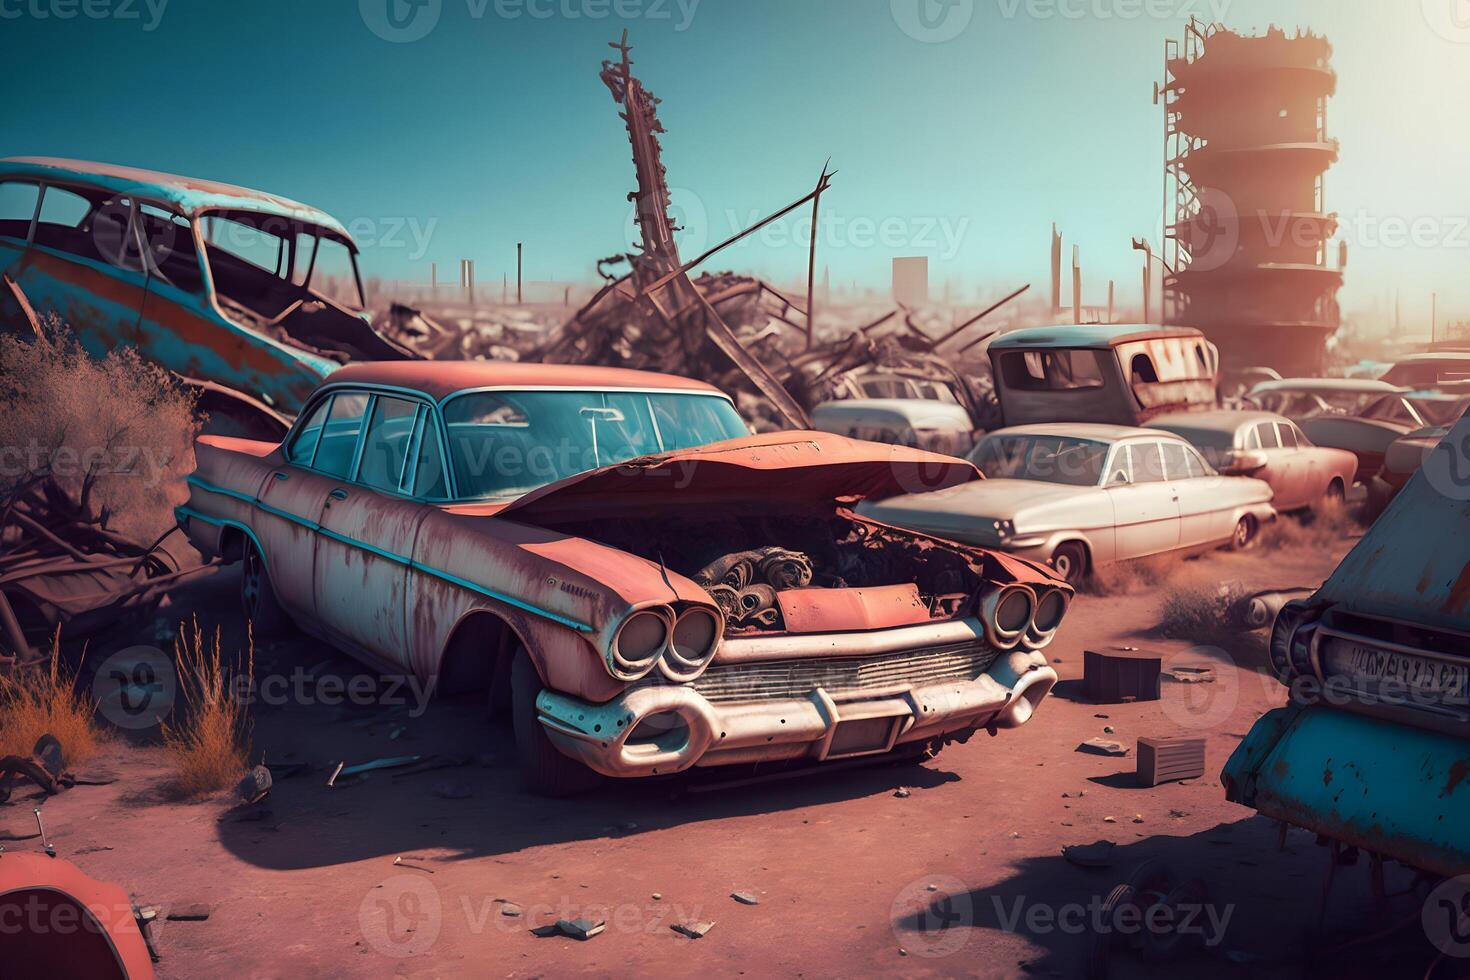 Cars graveyard, Pile of crushed and deformed cars waiting to be recycled in an old cars graveyard. Neural network photo